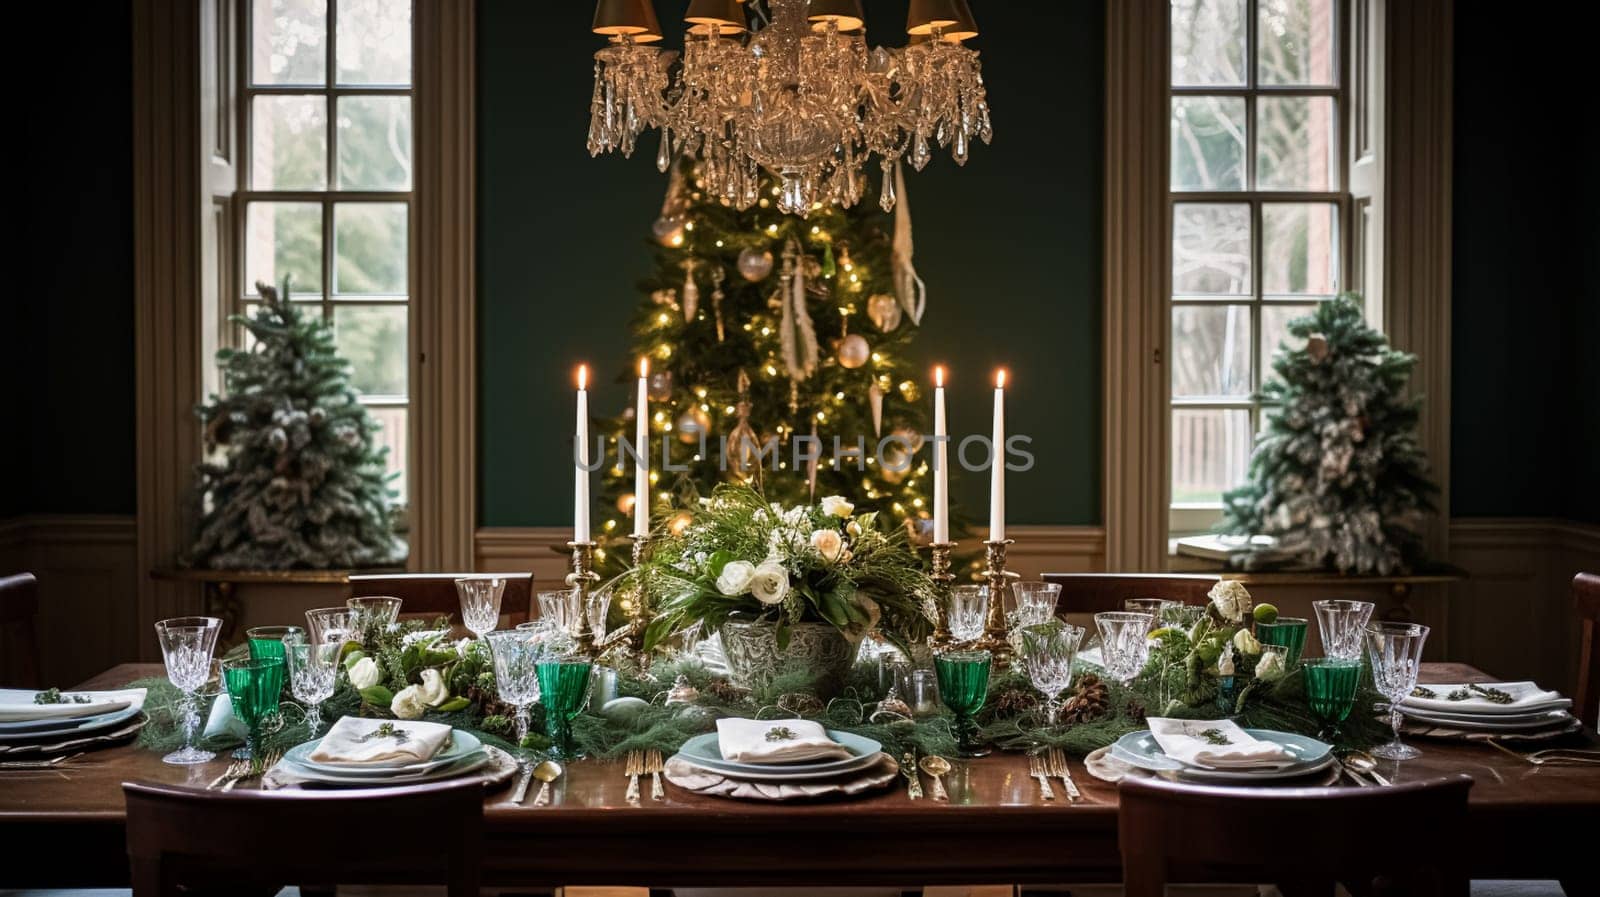 Christmas at the manor, holiday tablescape and dinner table setting, English countryside decoration and interior decor by Anneleven